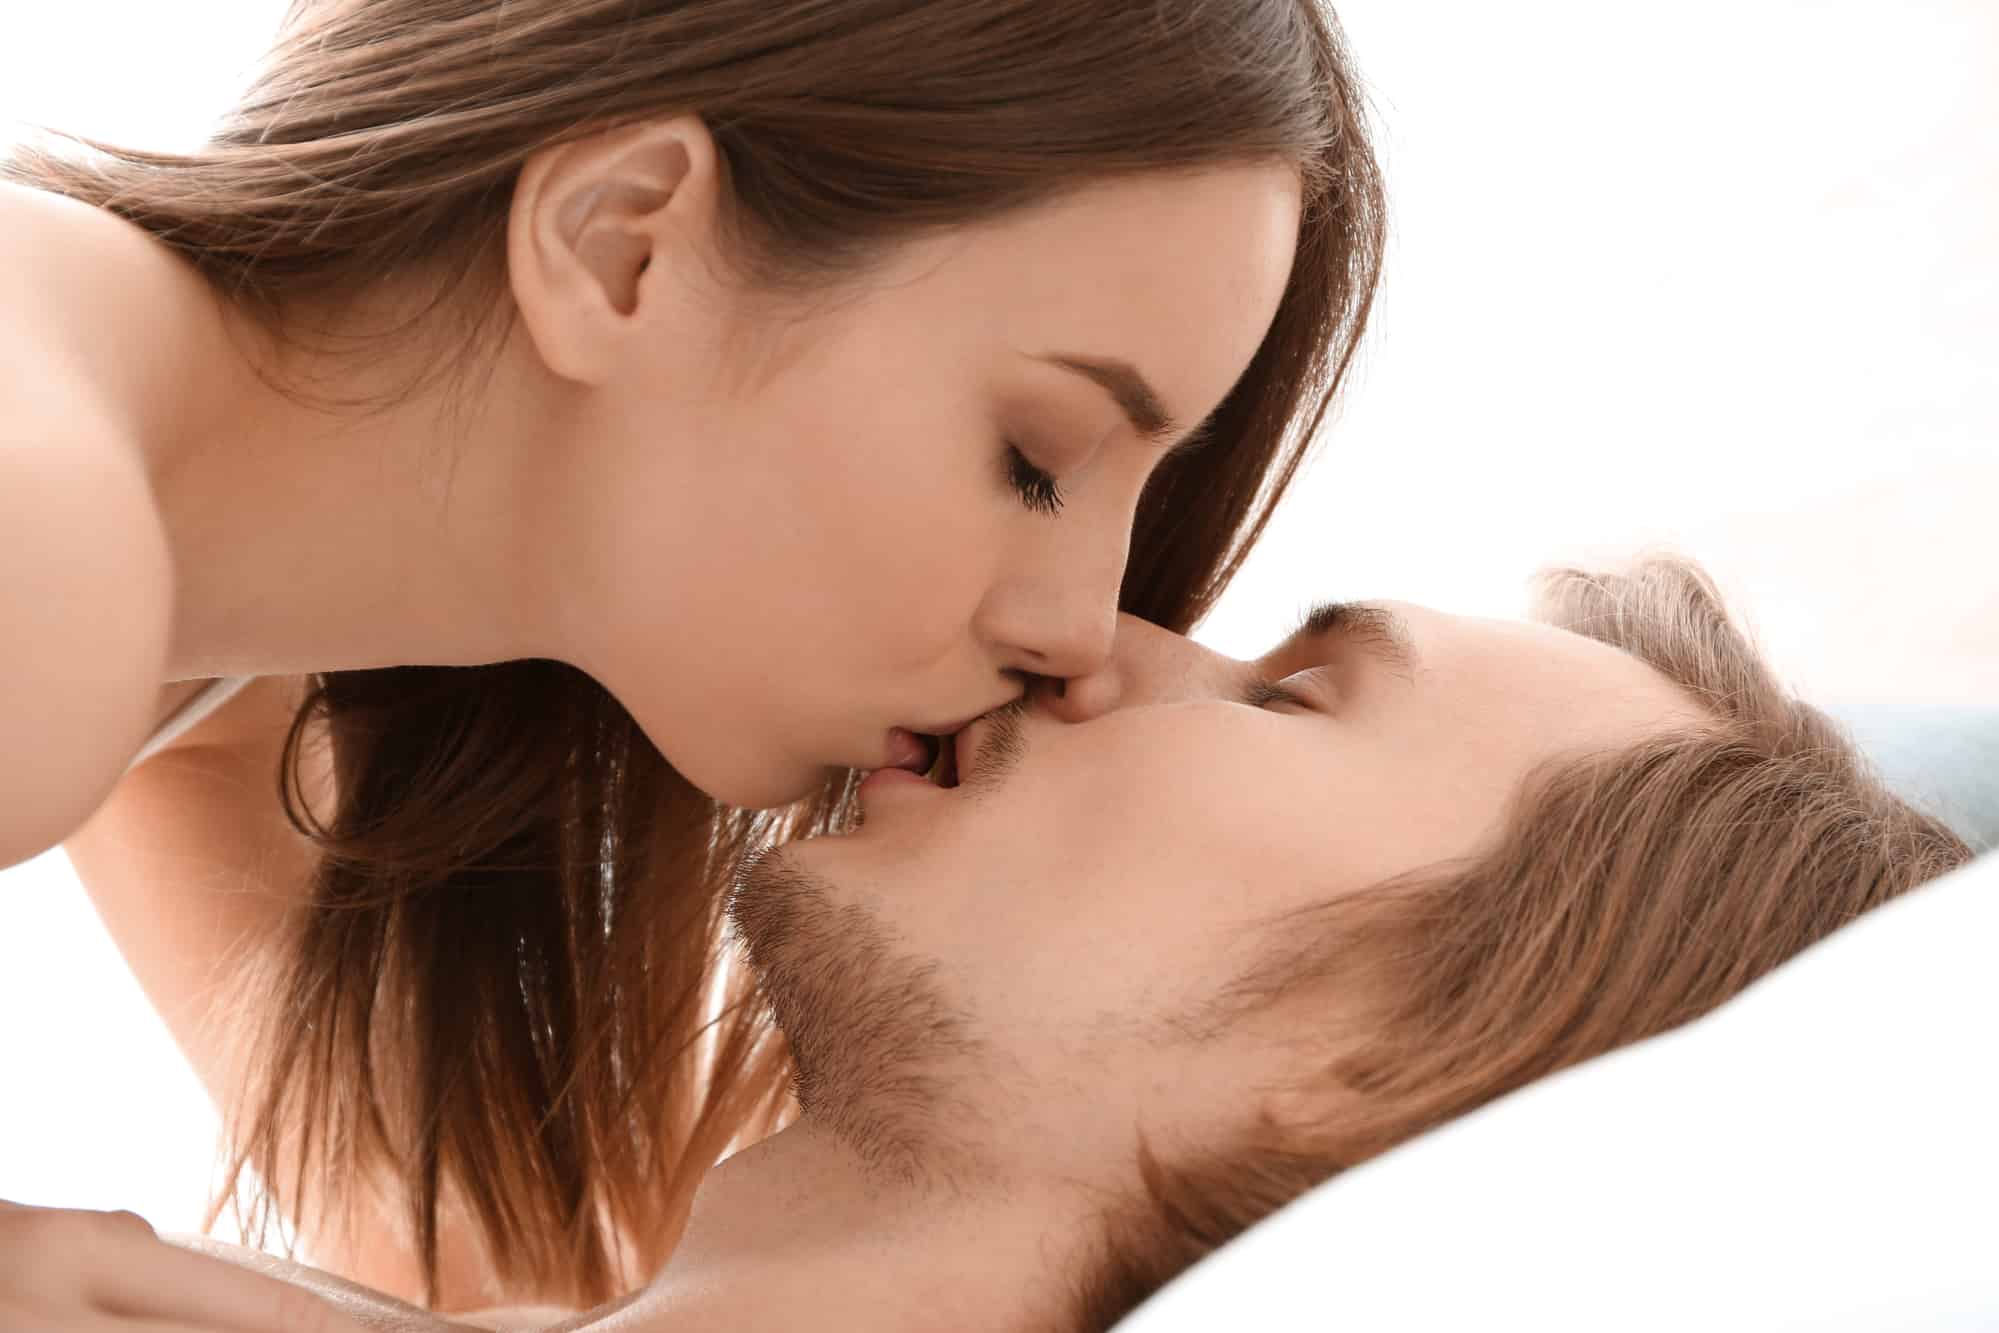 How to give romantic kiss